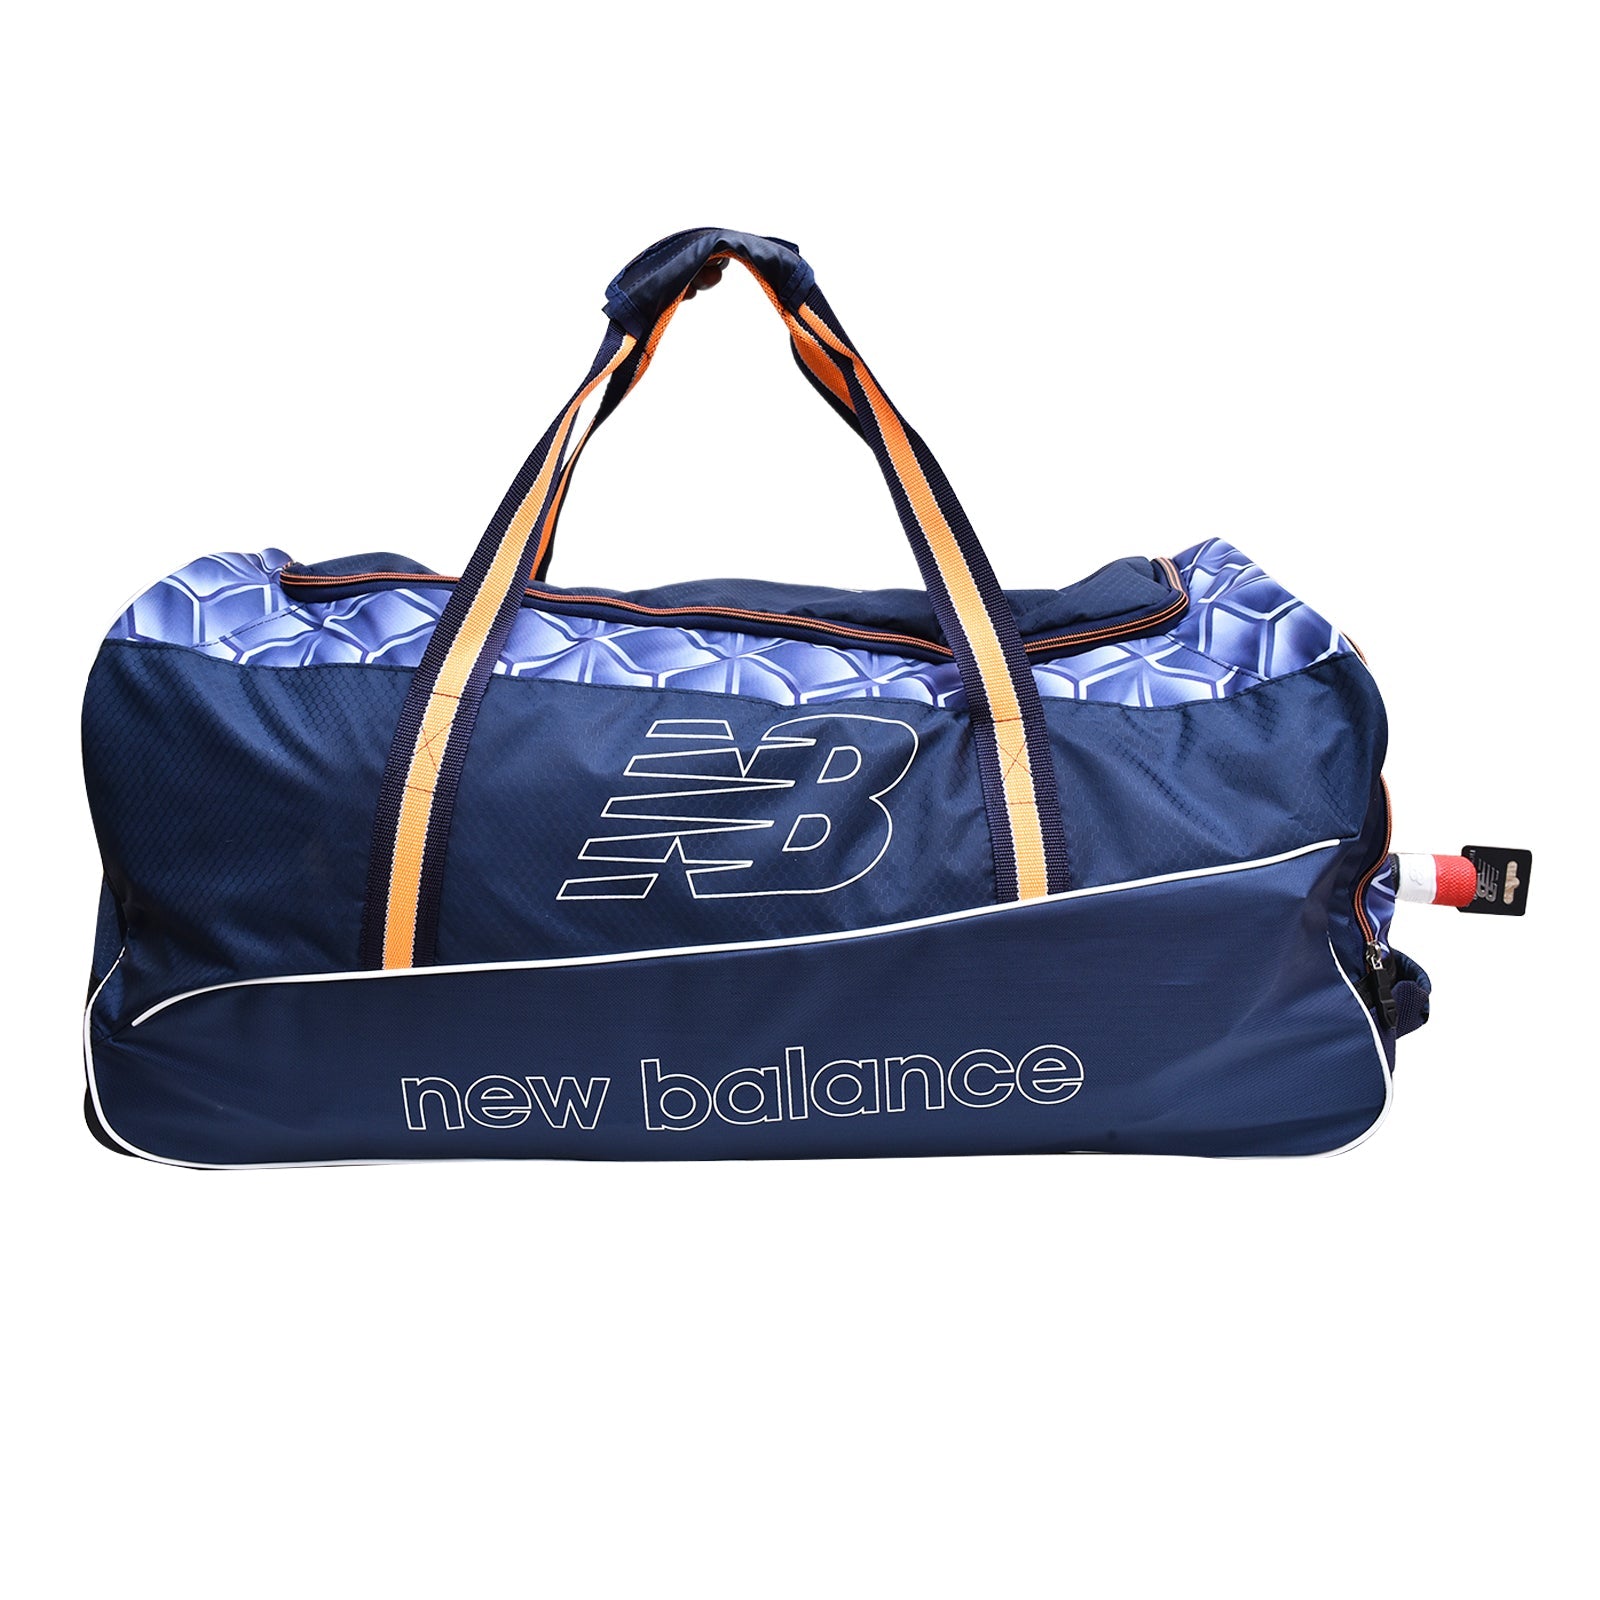 SI Pro Star Edition Cricket Kit Bag Blue and Grey,- Buy SI Pro Star Edition Cricket  Kit Bag Blue and Grey Online at Lowest Prices in India - | khelmart.com